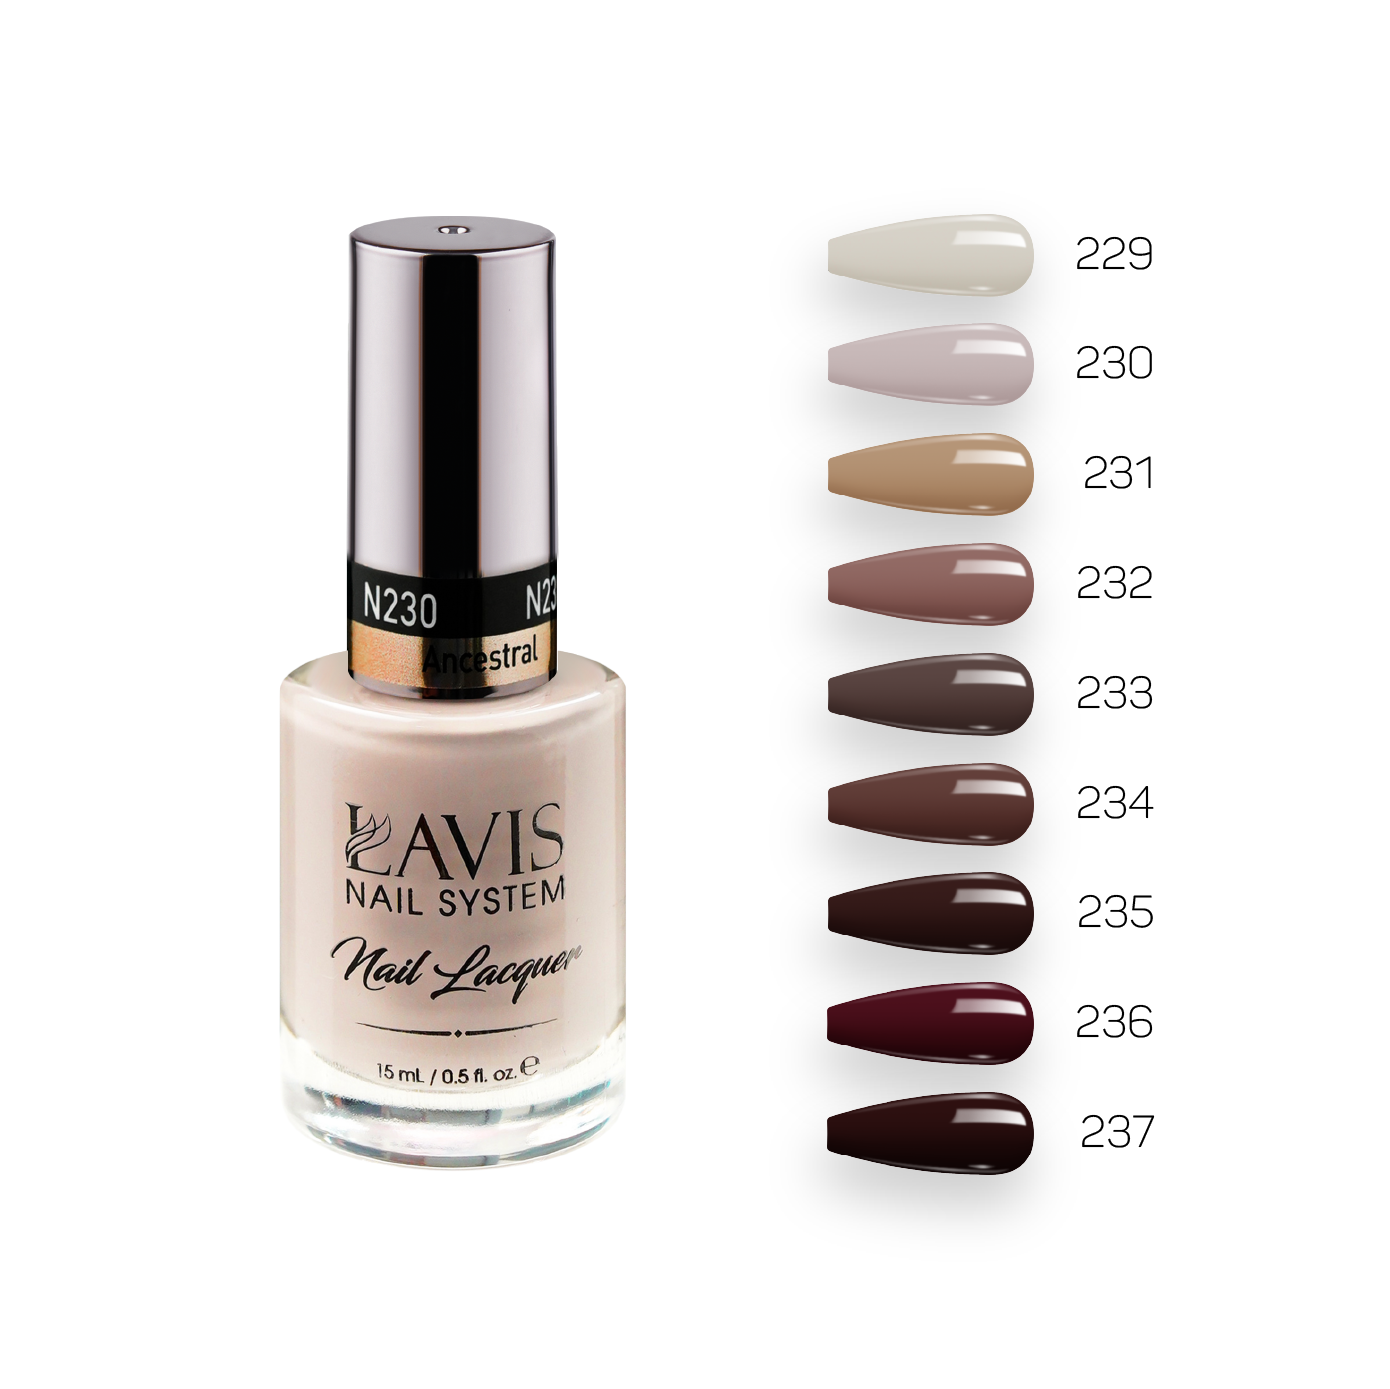 Lavis Healthy Nail Lacquer Fall Winter Set N1 (9 colors) : 229, 230, 231, 232, 233, 234, 235, 236, 237